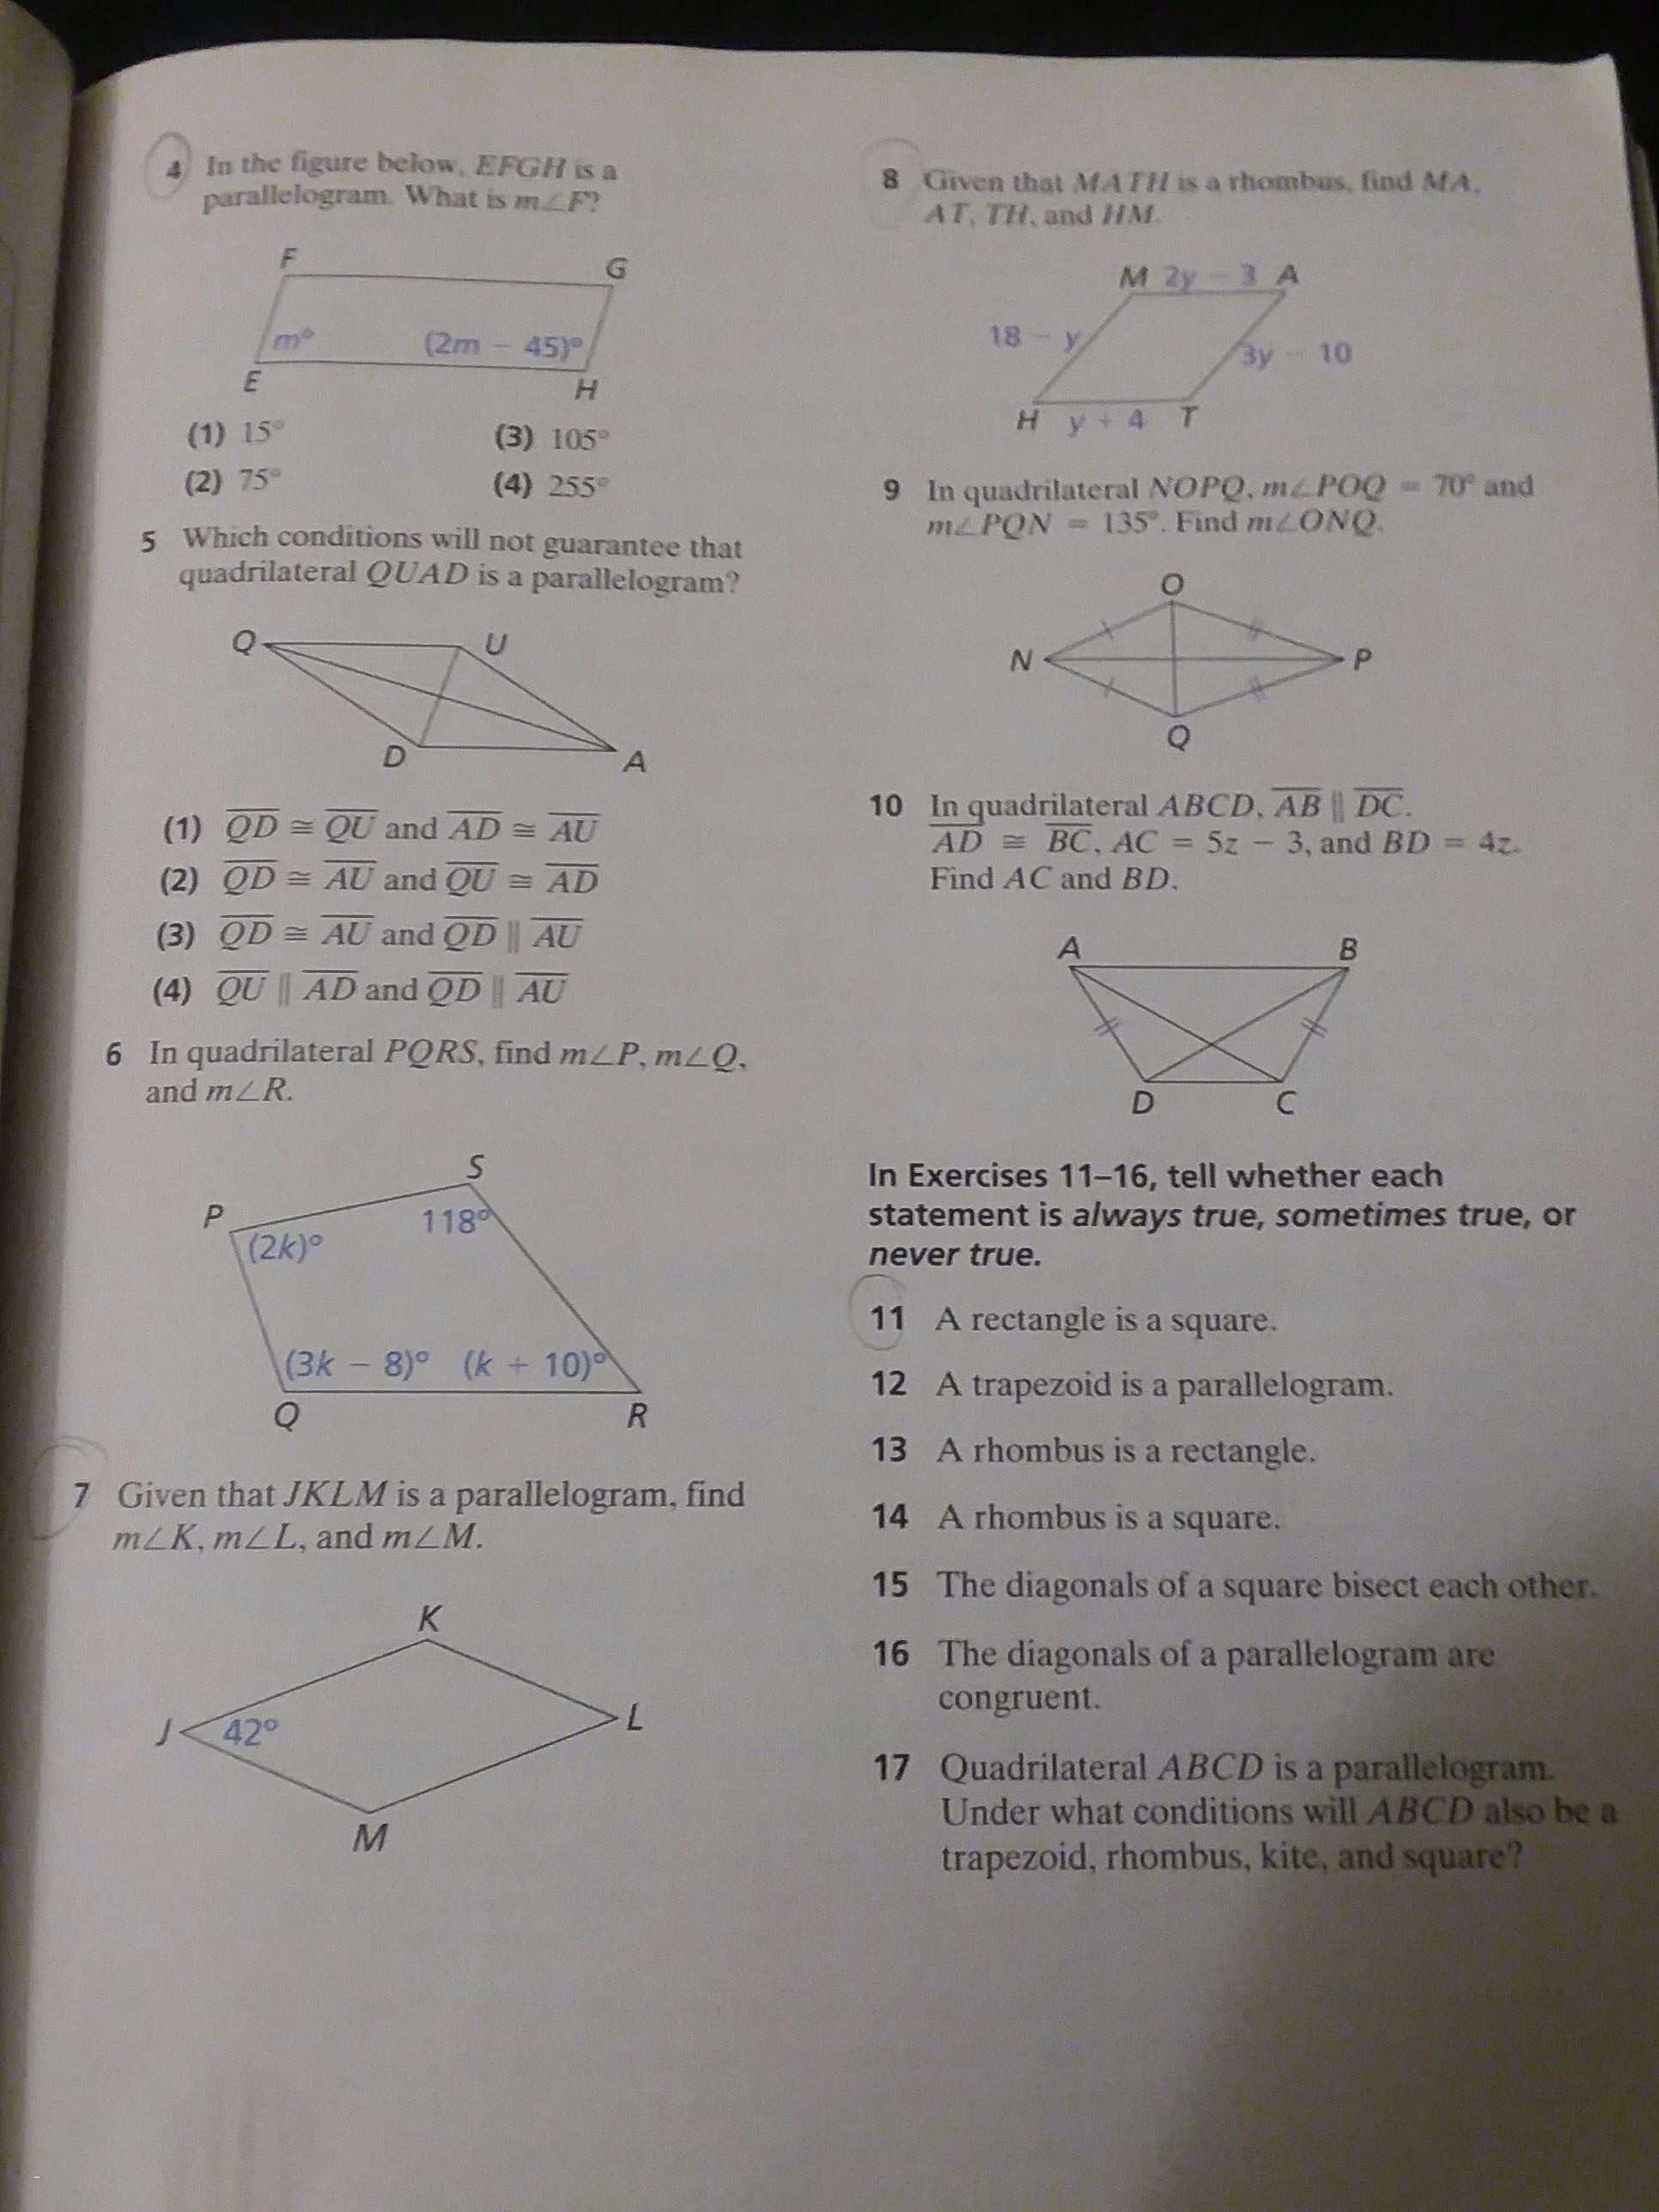 Conditions for Parallelograms Worksheet or Diagram Math Problems Inspirational Mathematical Diagram Best